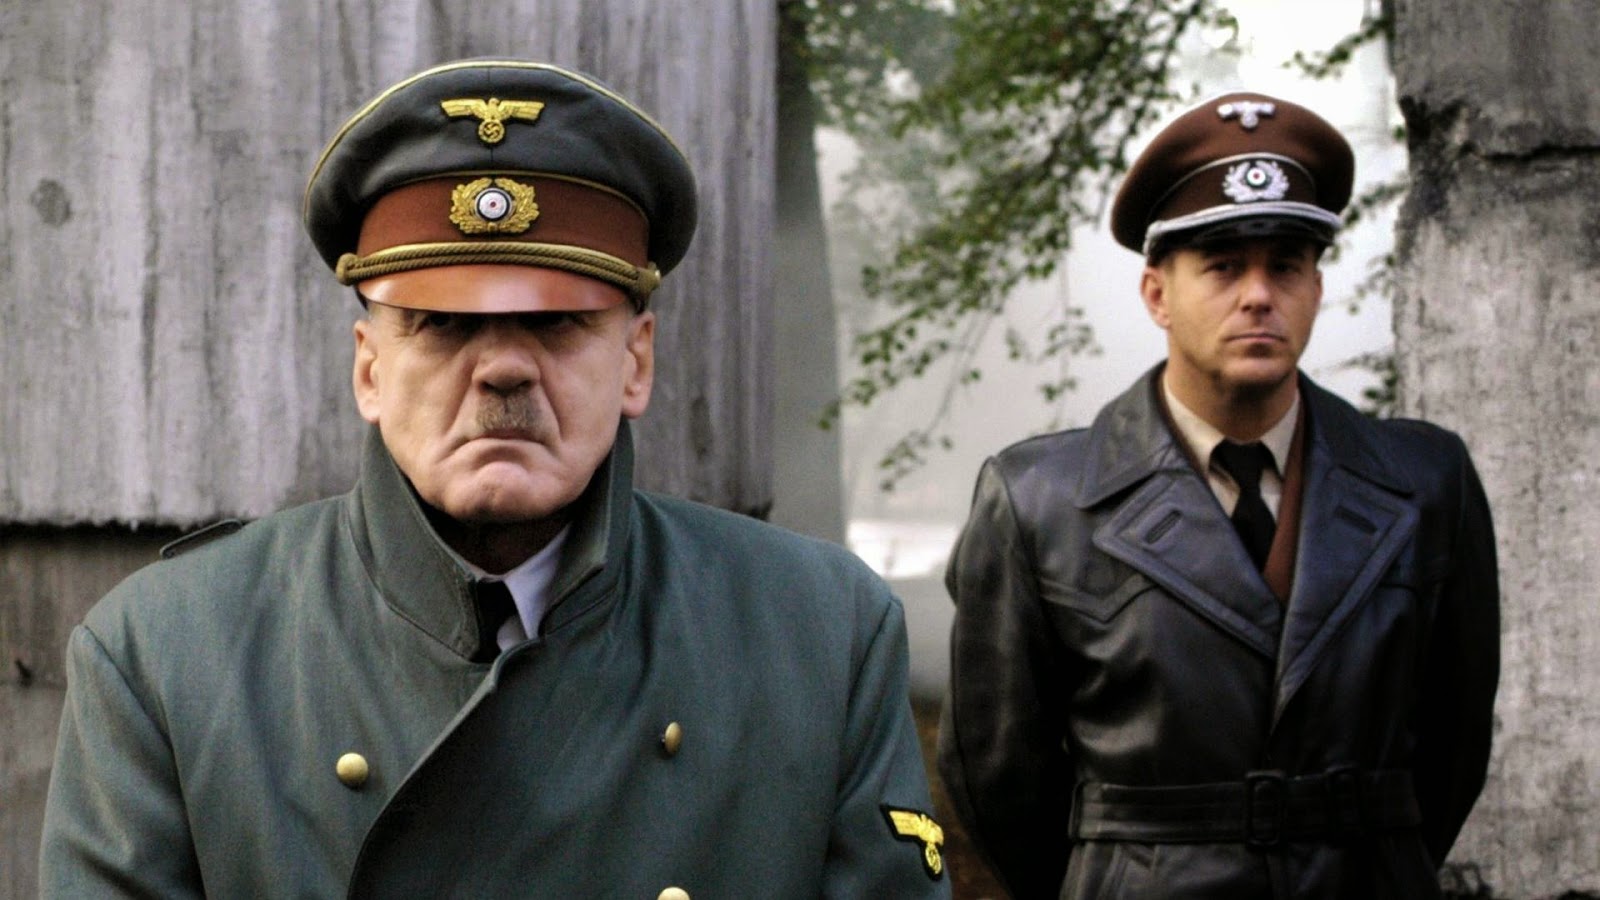 11 Anti-war And Anti-fascism Movies You Really Have To Watch - Downfall